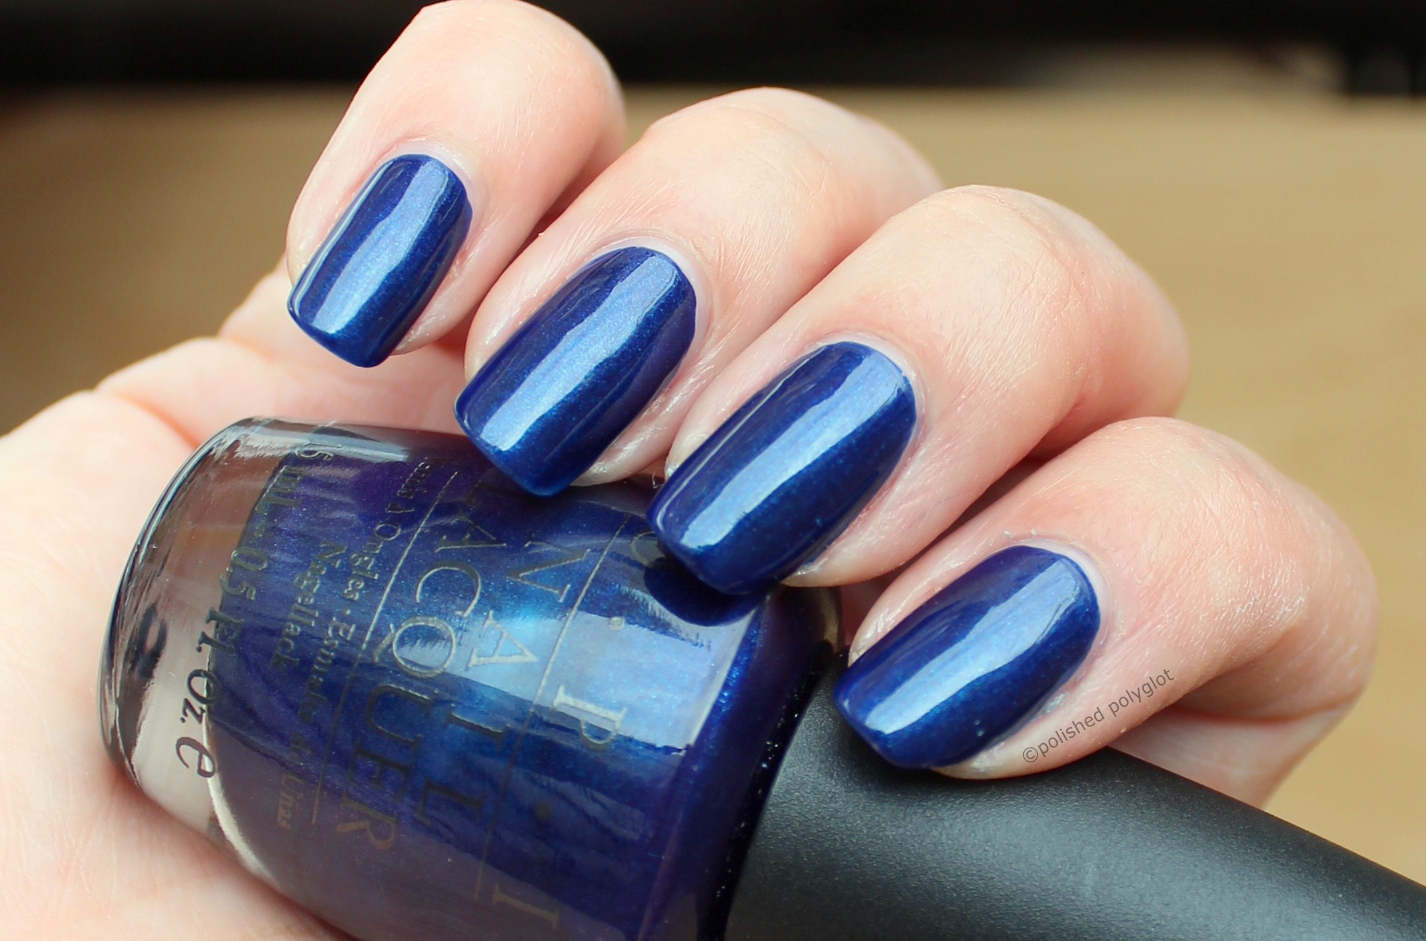 Opi Yoga Ta Get This Blue Swatch One of my favorite purple polishes